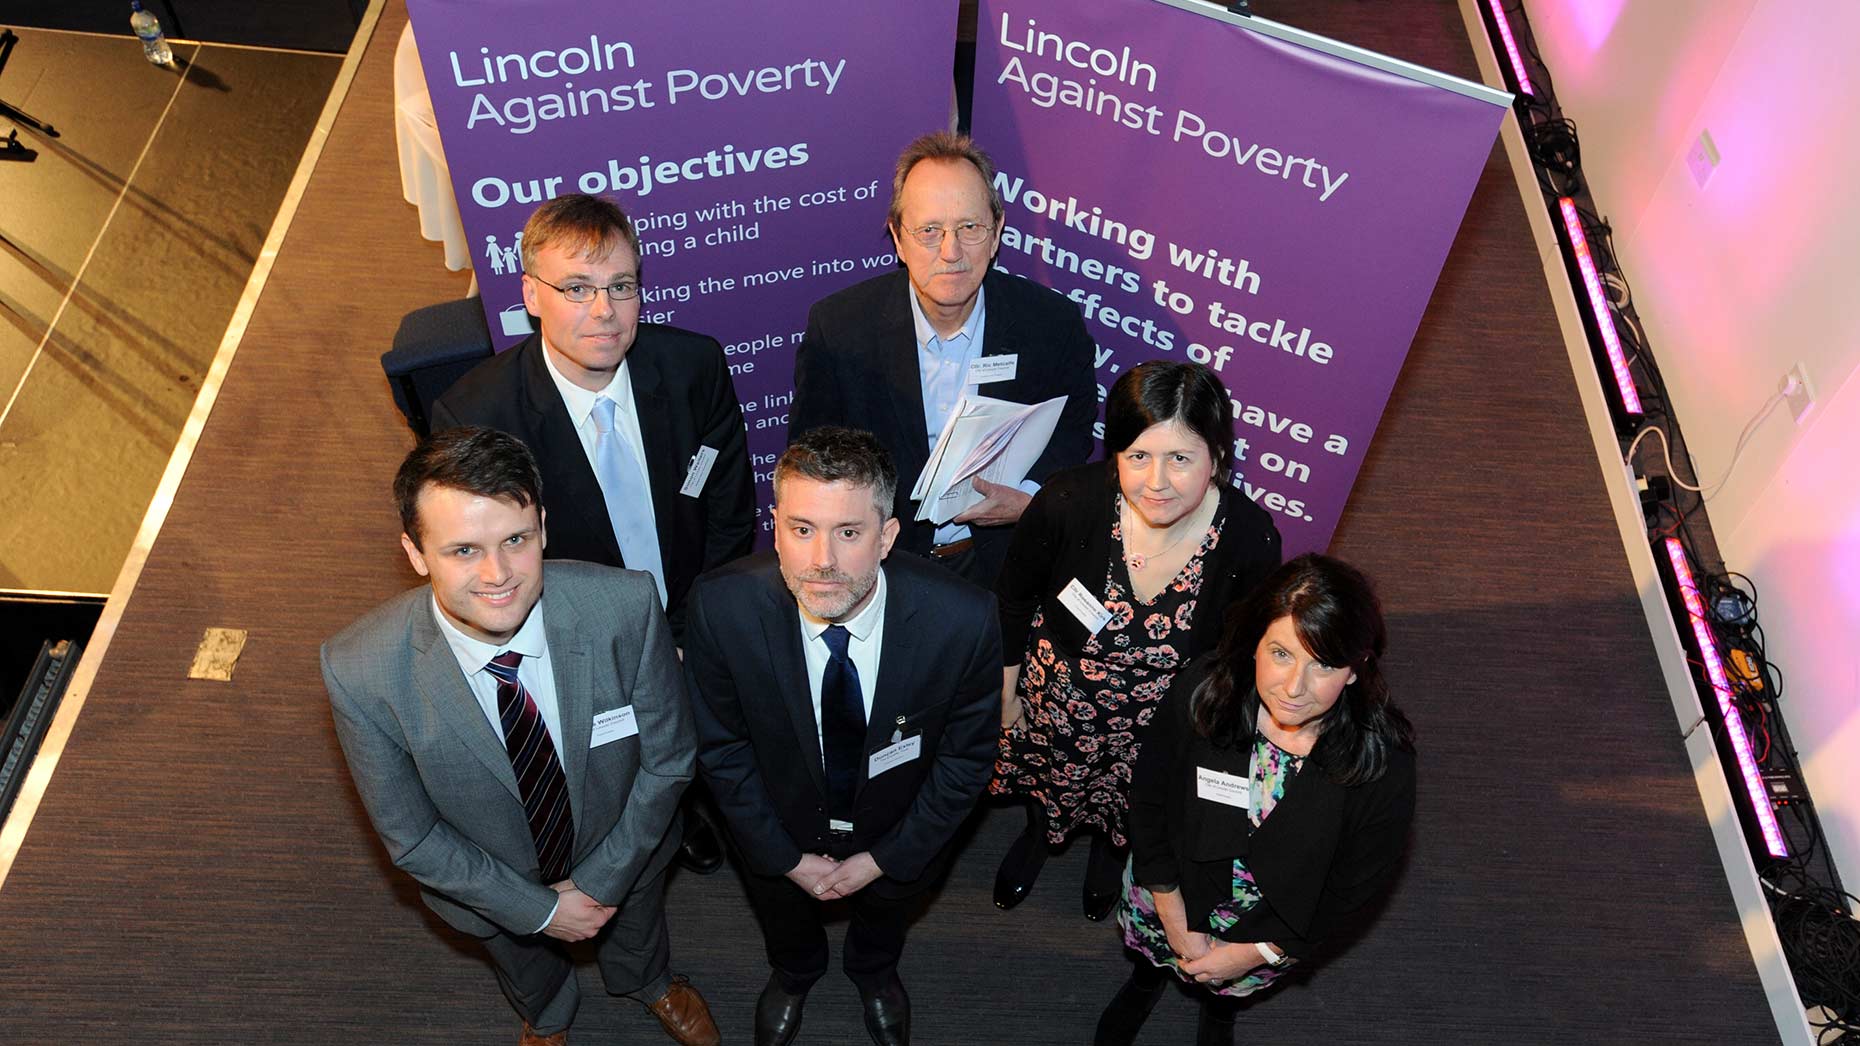 Lincoln Against Poverty - proud and making a difference